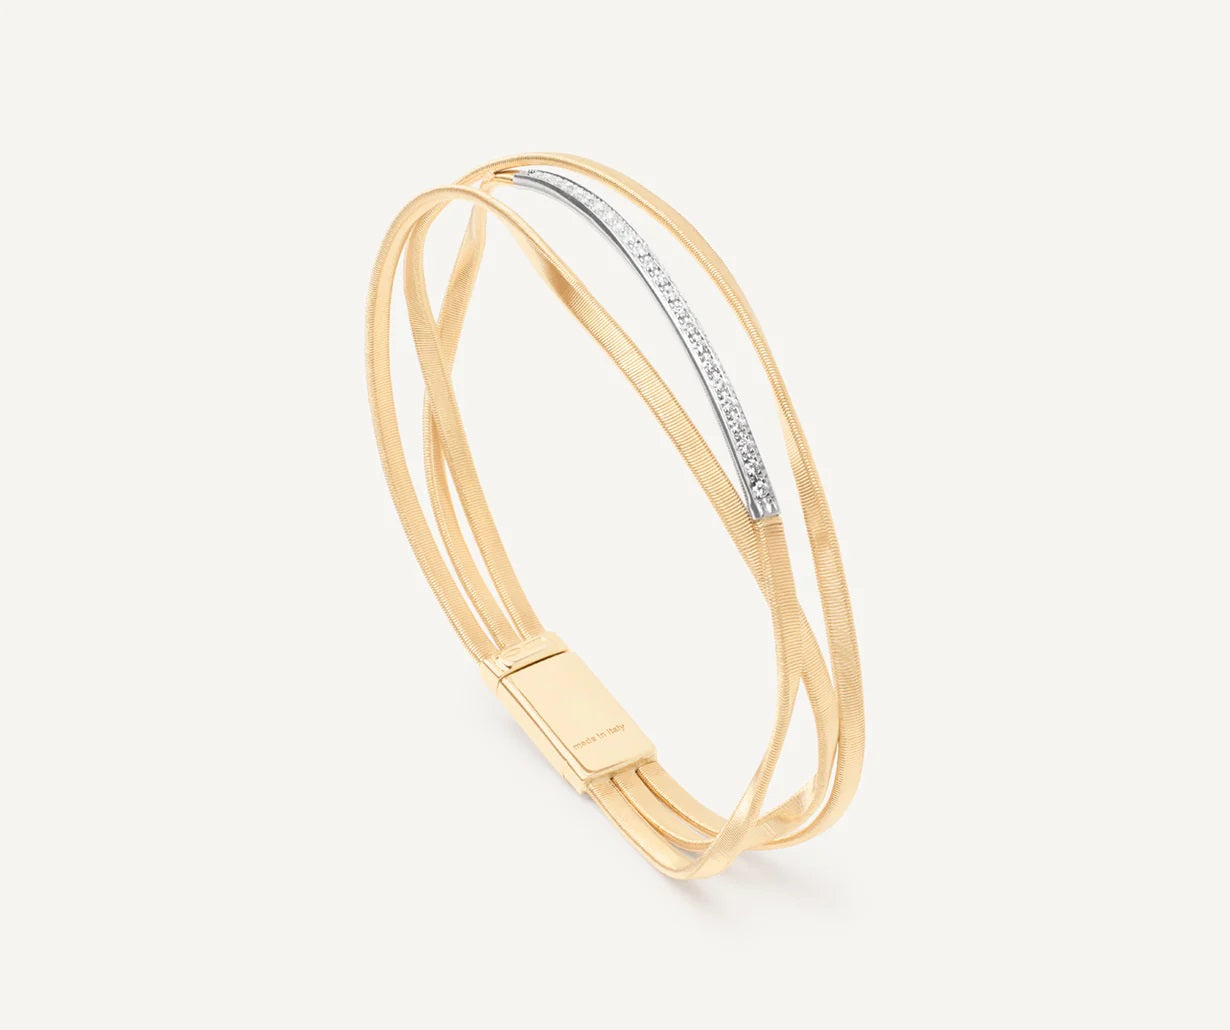 18K YELLOW GOLD 3-STRAND BANGLE WITH DIAMOND BAR FROM THE MARRAKECH COLLECTION